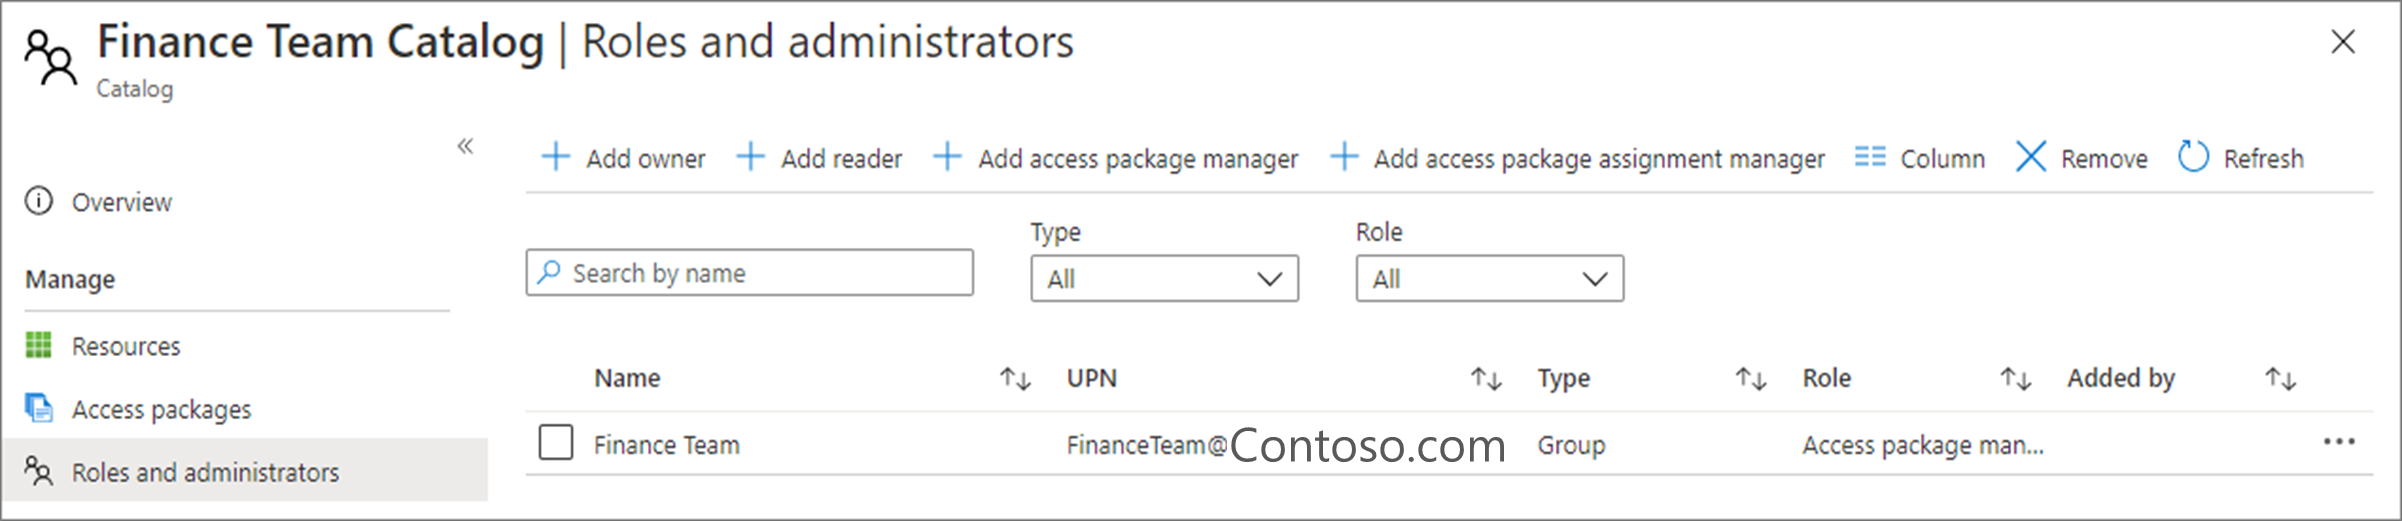 Screenshot of options and entries under Roles and administrators.